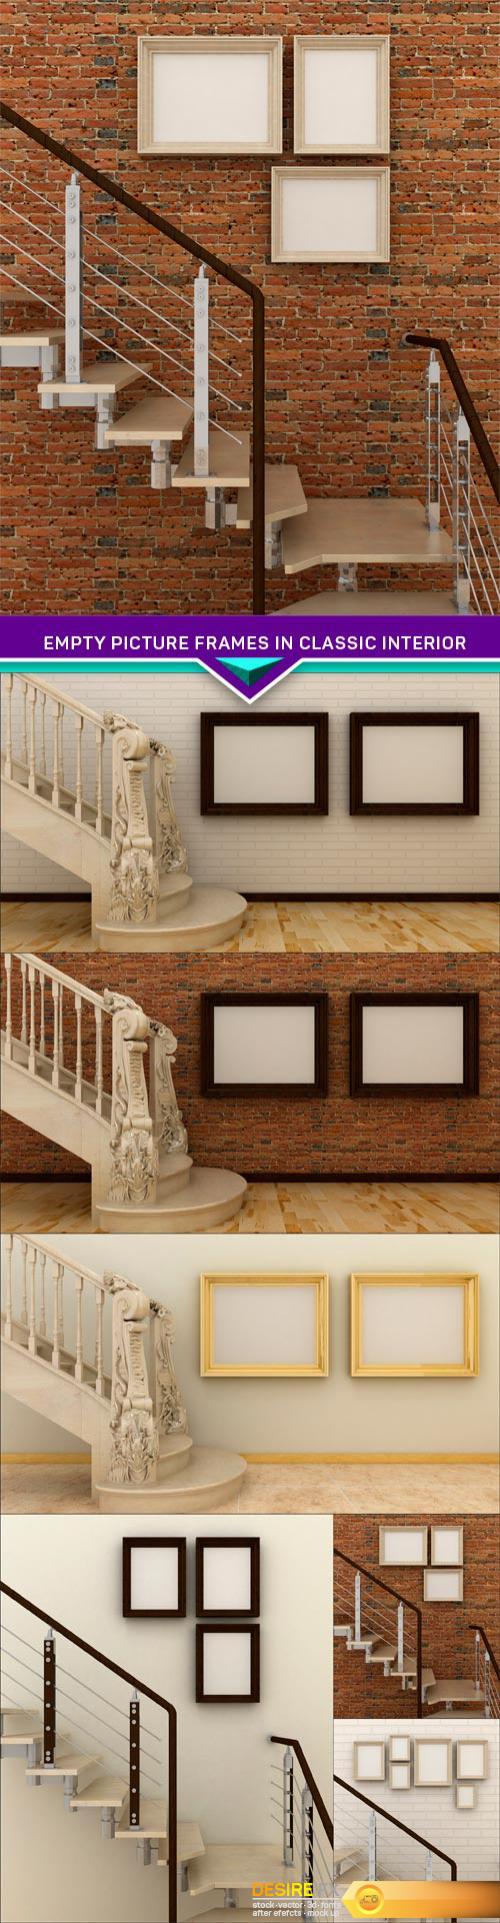 Empty picture frames in classic interior 6X JPEG